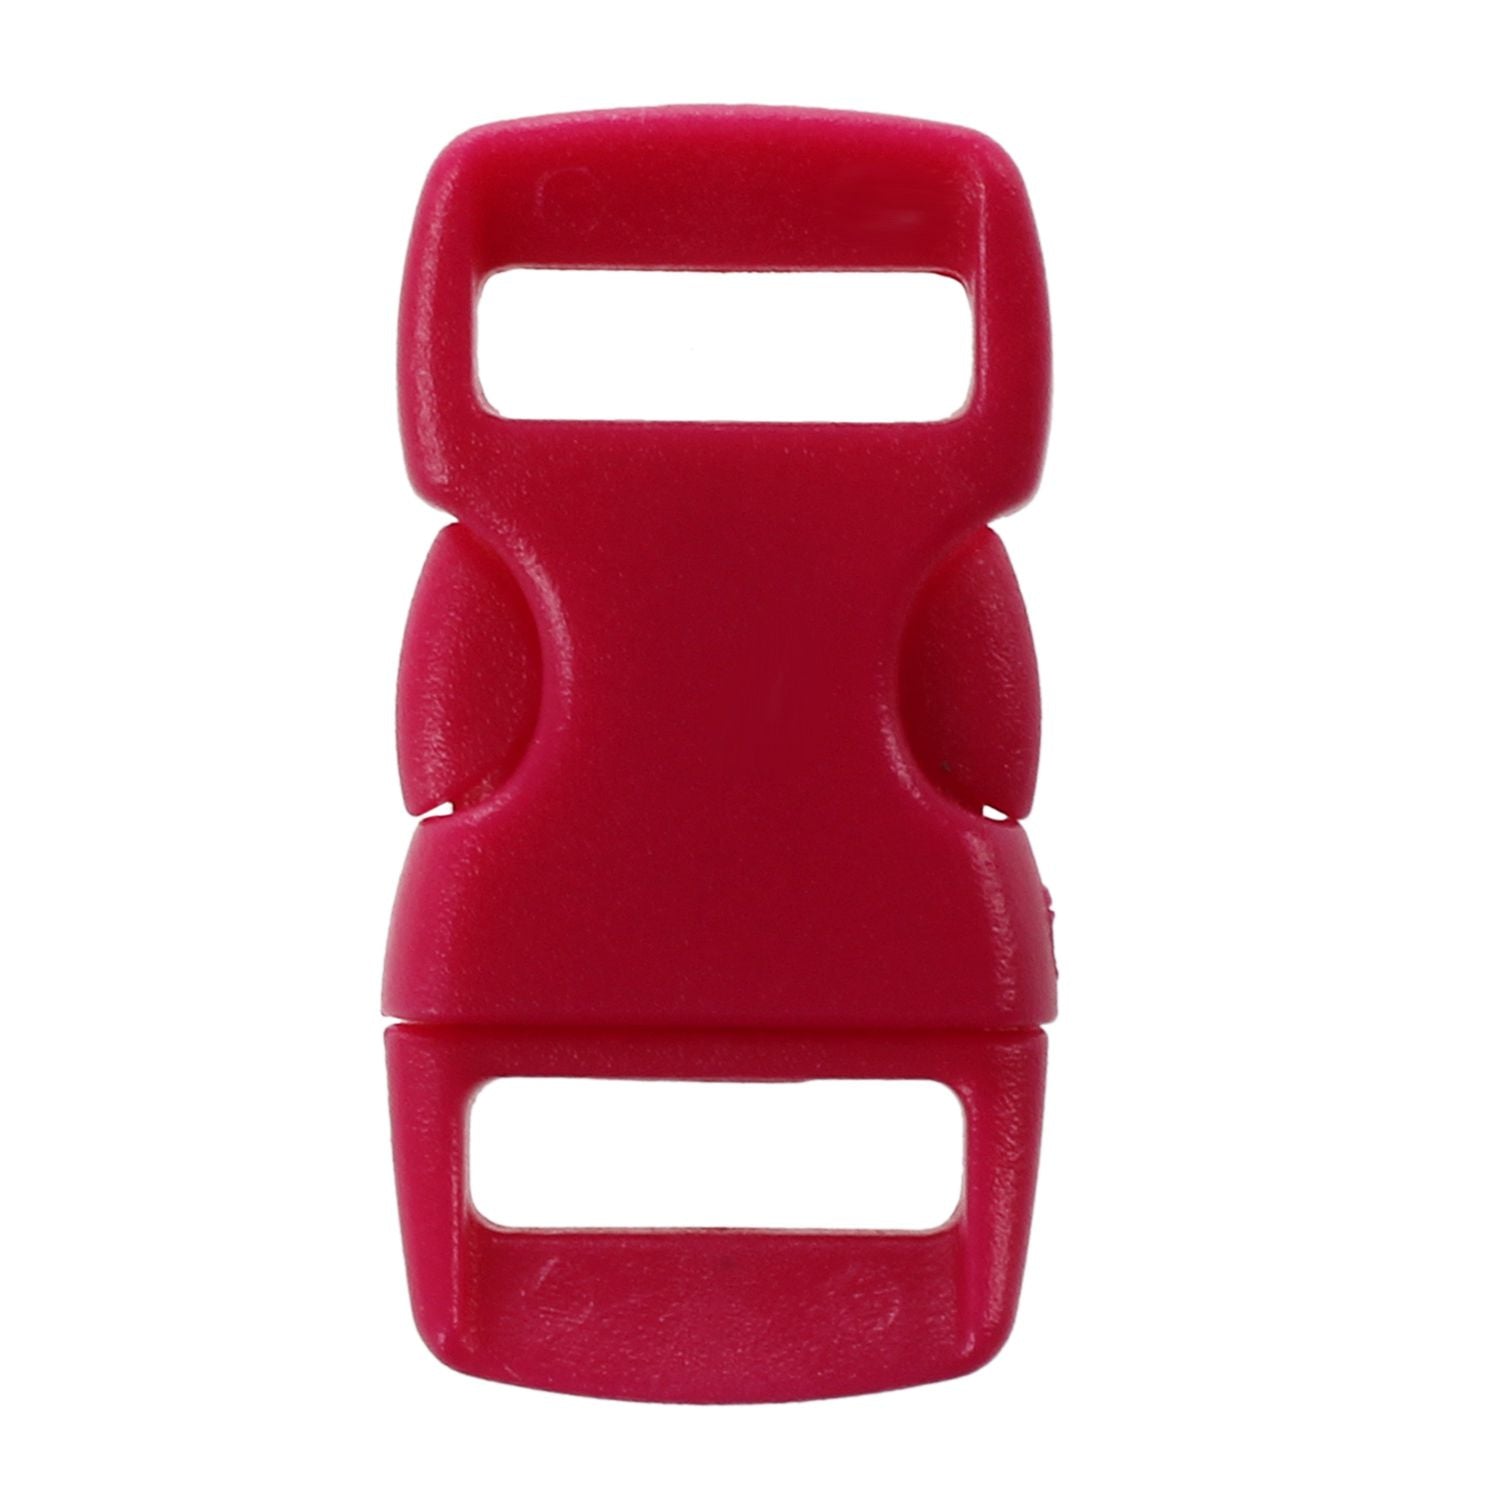 New 5 pieces 11mm Wide Plastic Release Side Buckle for Luggage Boxes Backpack Strap 29 x 15 x 6mm / 1.14 inchx 0.6inch x 0.24 - ebowsos